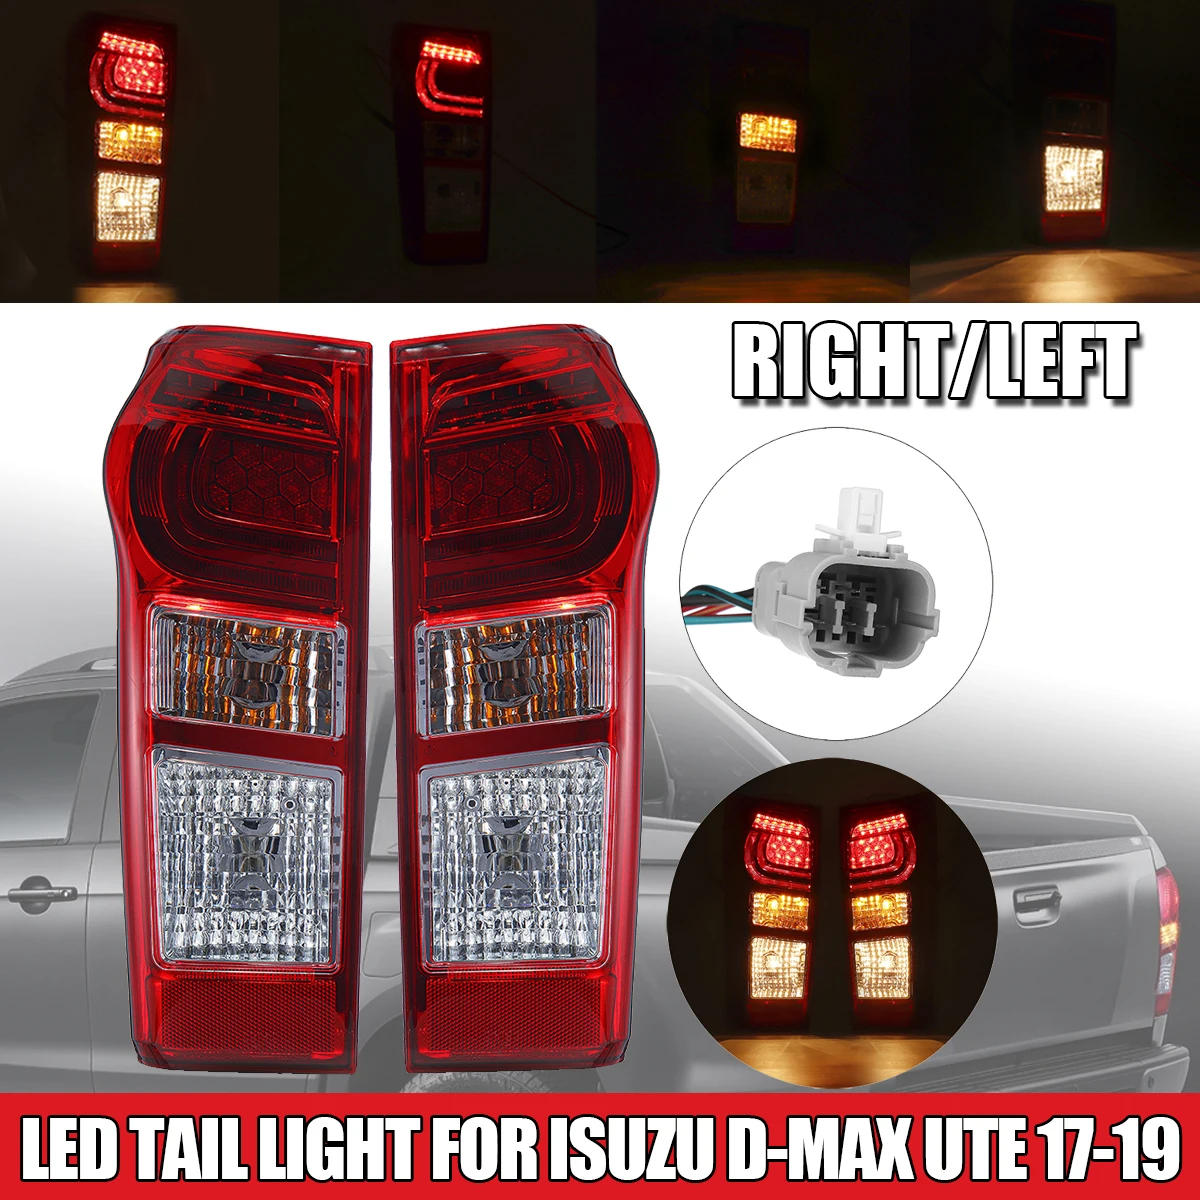 

Car Rear LED Tail Light For Isuzu DMax D-Max Ute 2017 2018 2019 With Wire Harness Bulbs Replacement 8961253983 898125393